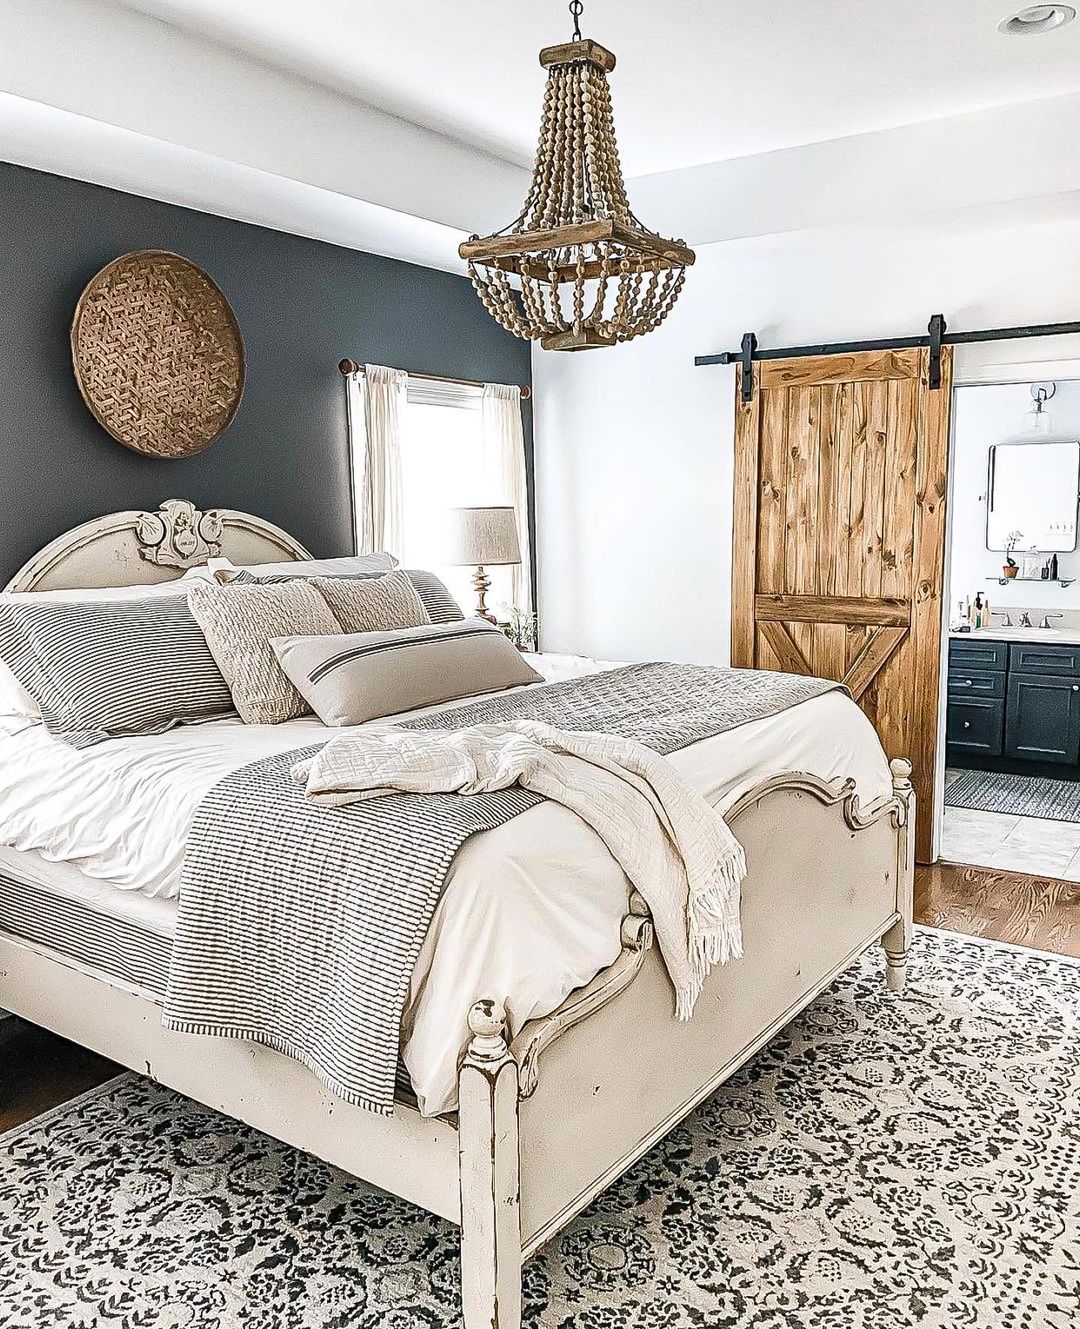 Farmhouse style vintage bed with weathered white paint finish. Photo by Instagram User @alittledoseofjen